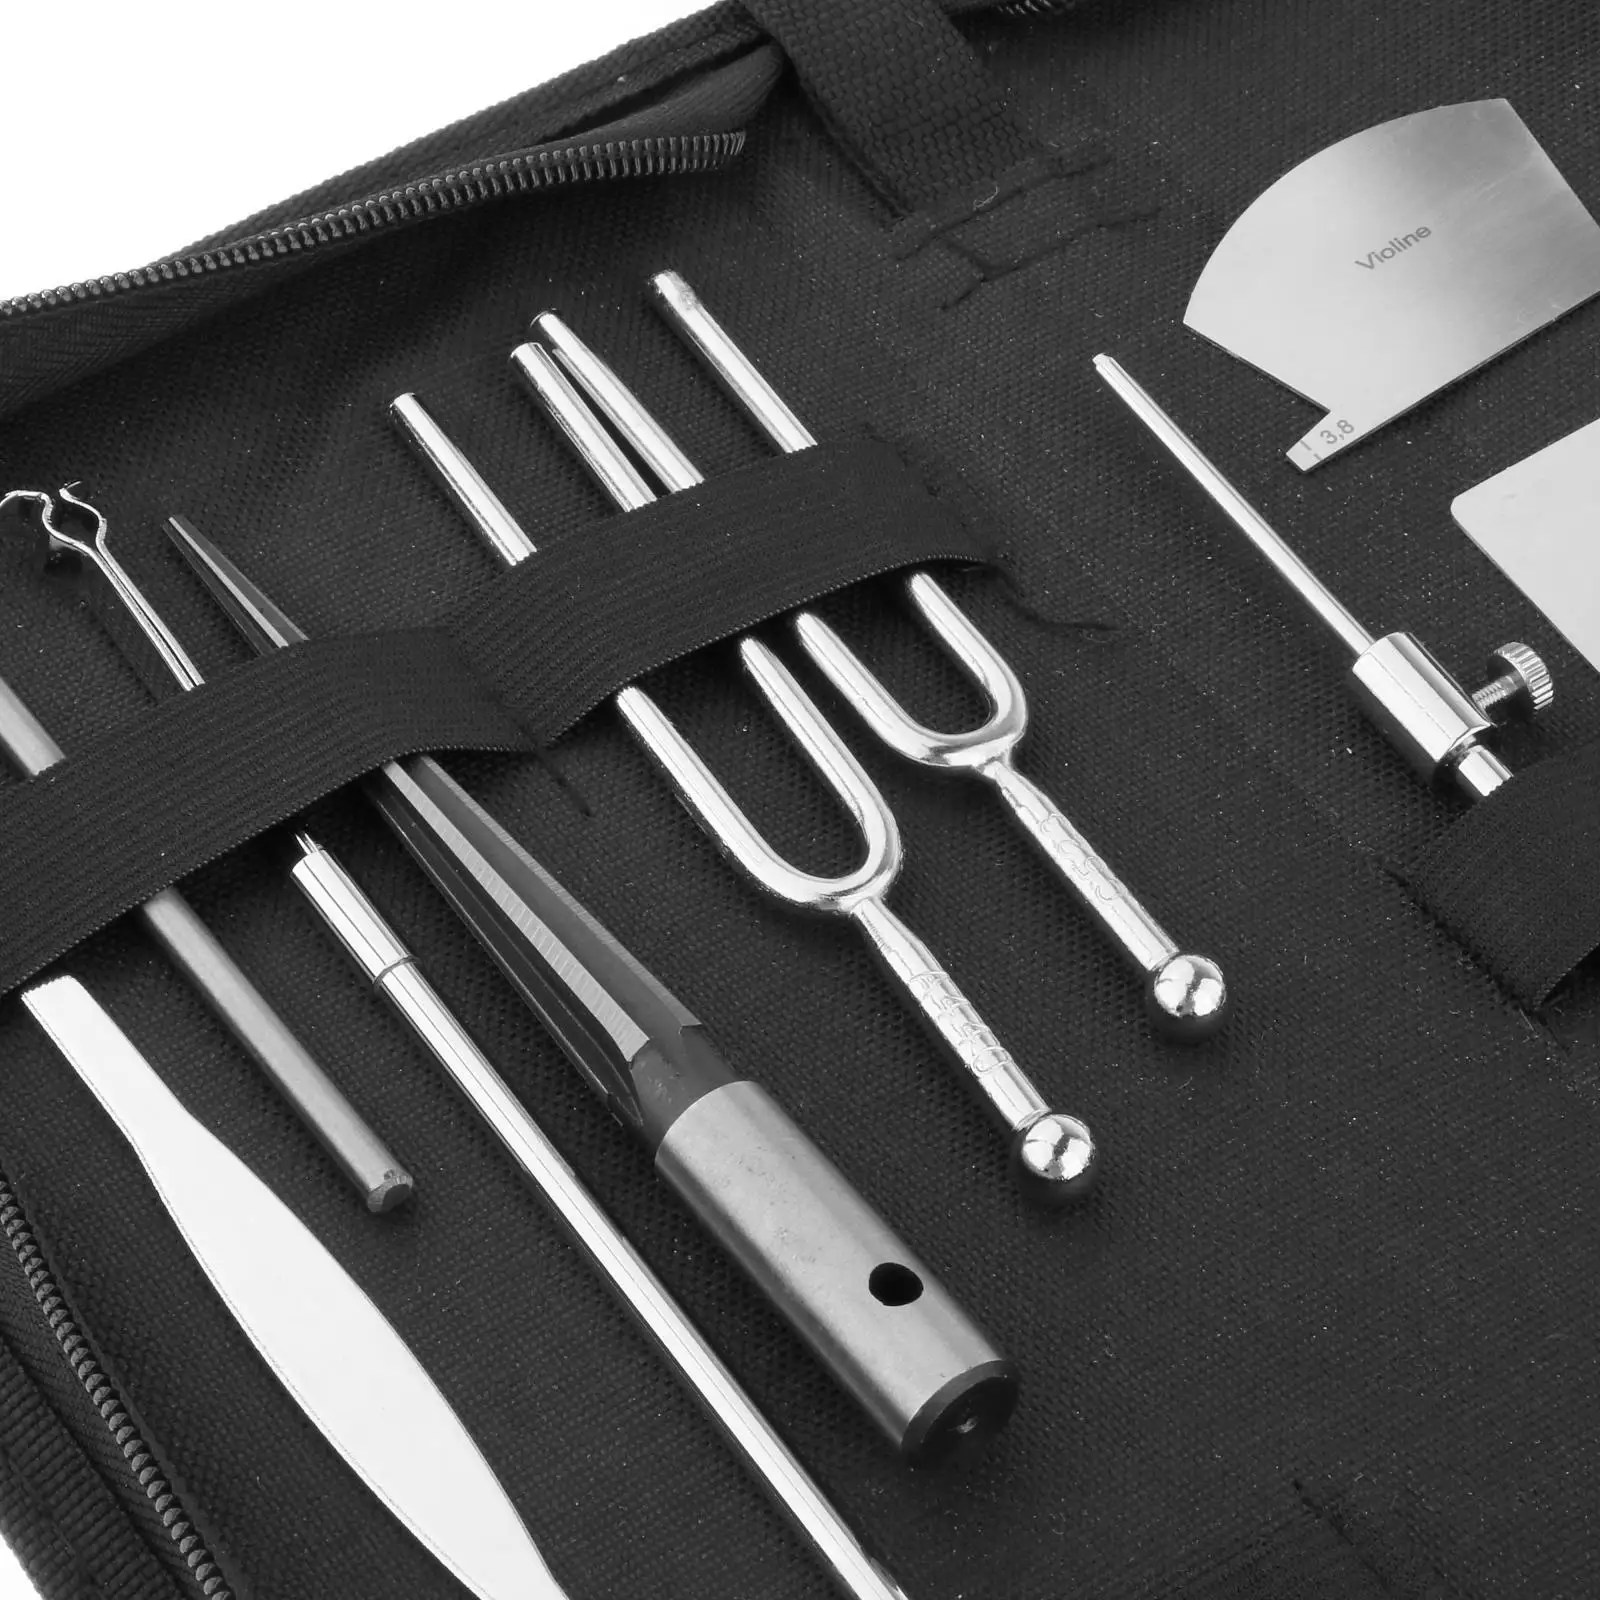 Violin Repairing Tools Set Retriever Clip Luthier Tool with Carrying Bag Tuning Forks